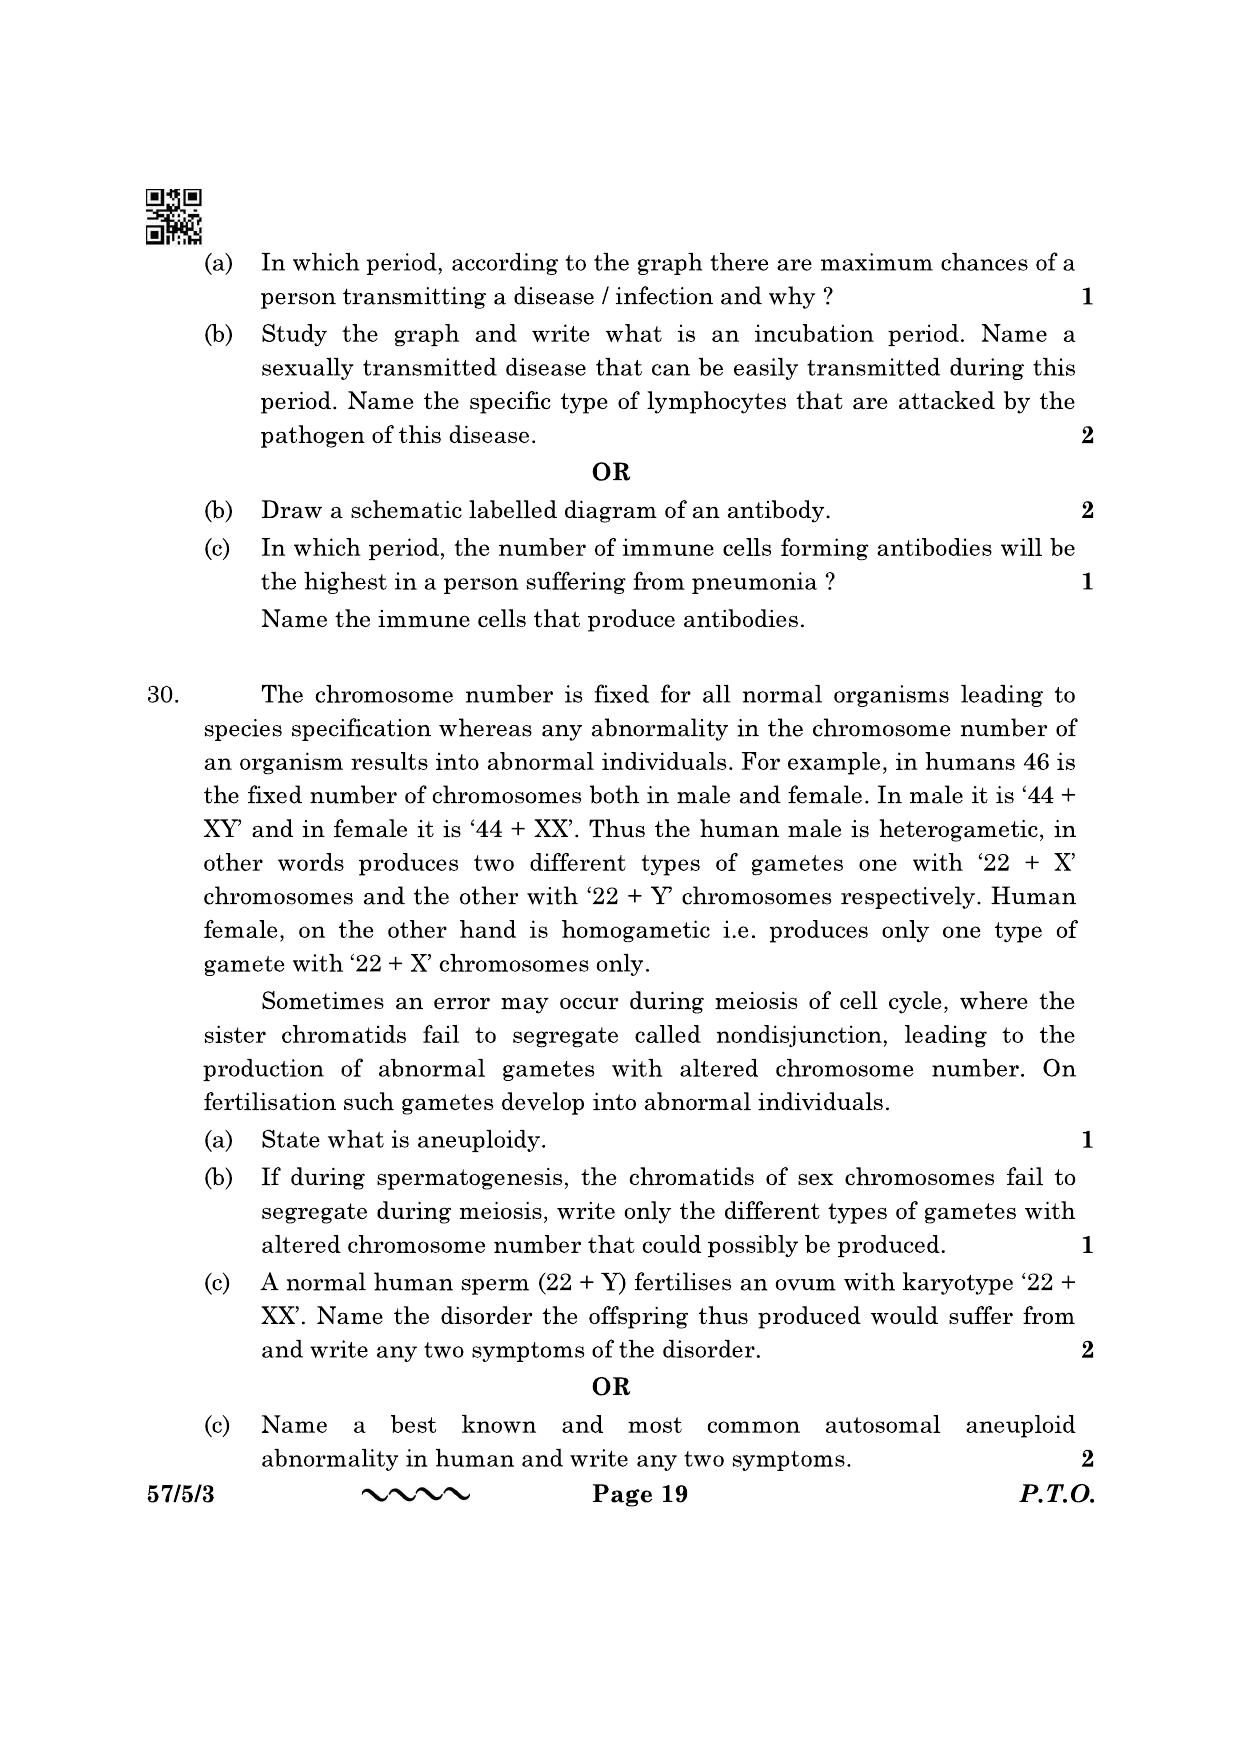 CBSE Class 12 57-5-3 Biology 2023 Question Paper - Page 19